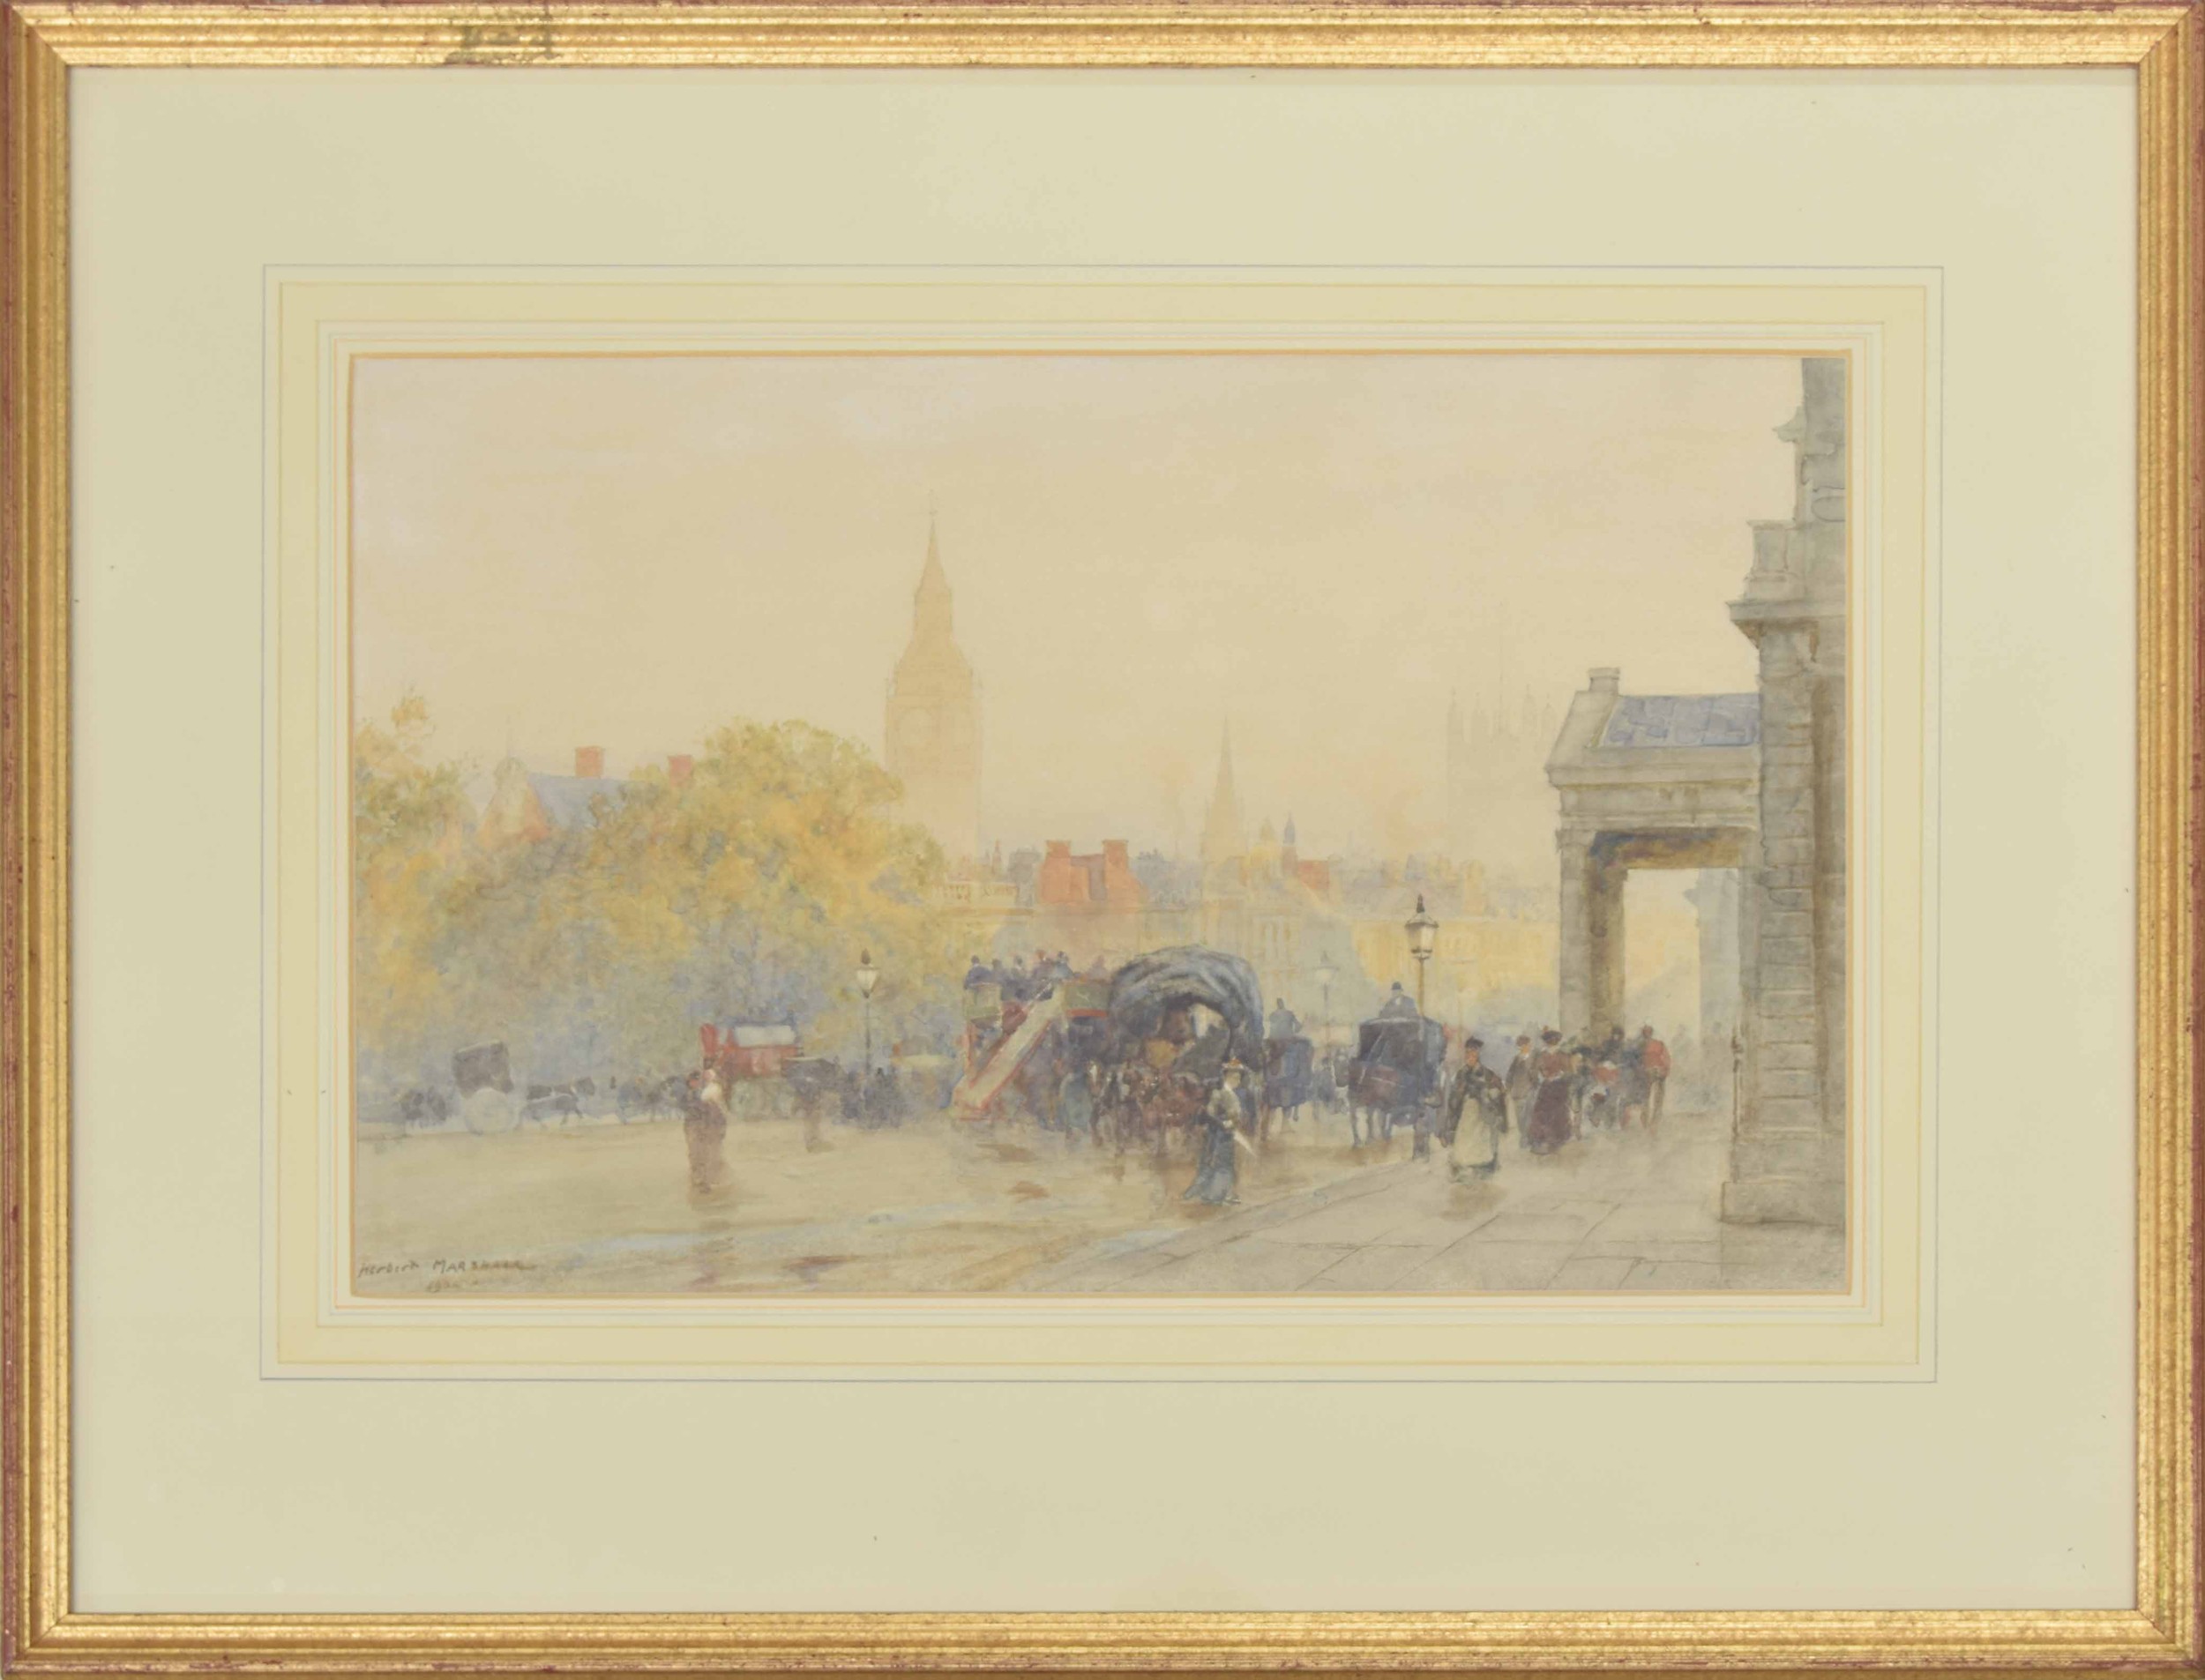 Herbert Menzies Marshall VPRWS, RE, ROI (1841-1913) - London street scene with carriages and - Image 2 of 2